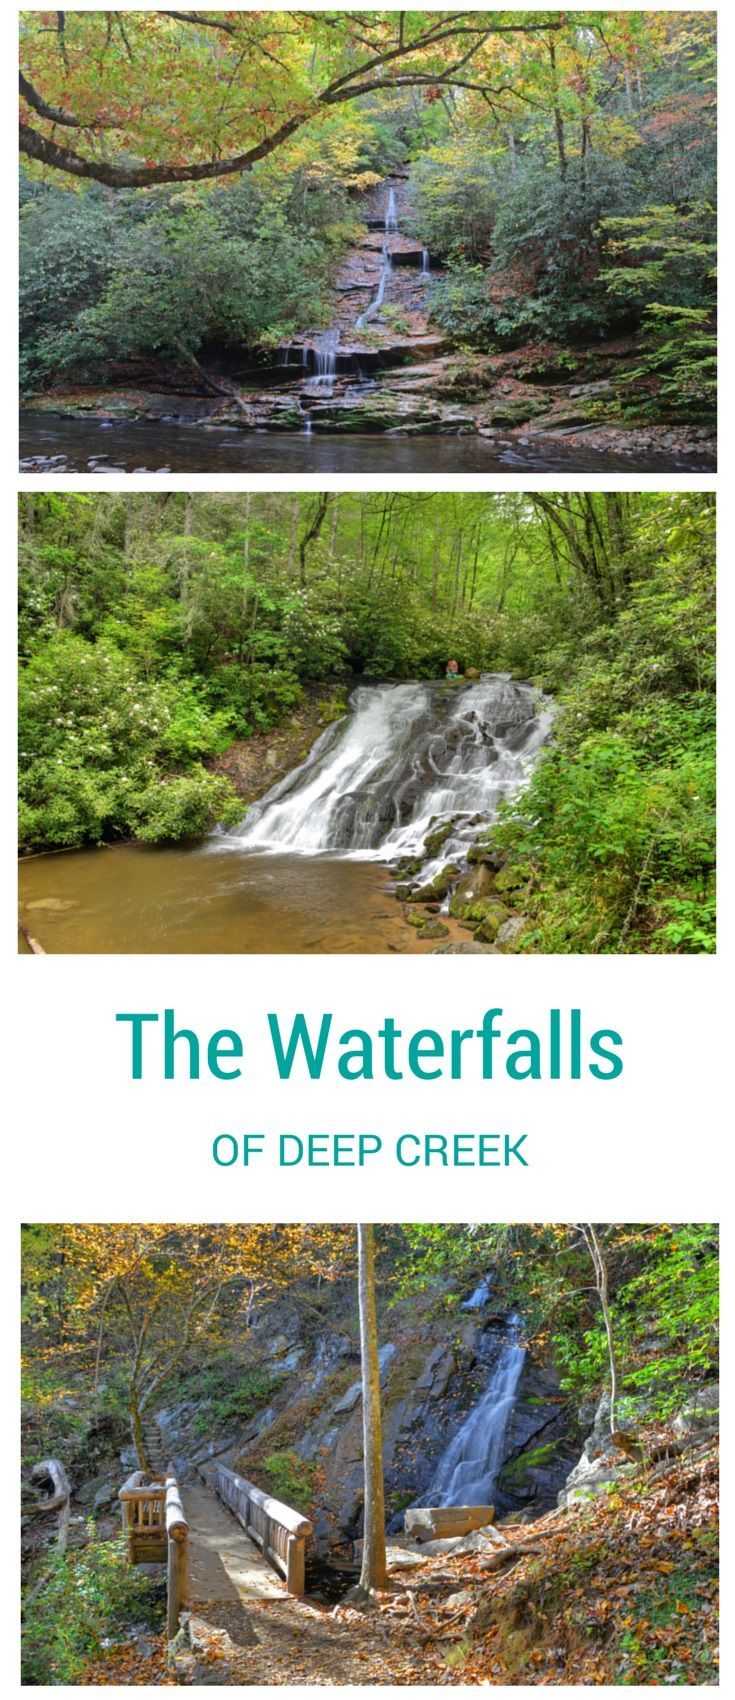 The waterfalls of Deep Creek, Great Smoky Mountains National Park, near Bryson City, NC, include Tom Branch Falls, Indian Creek